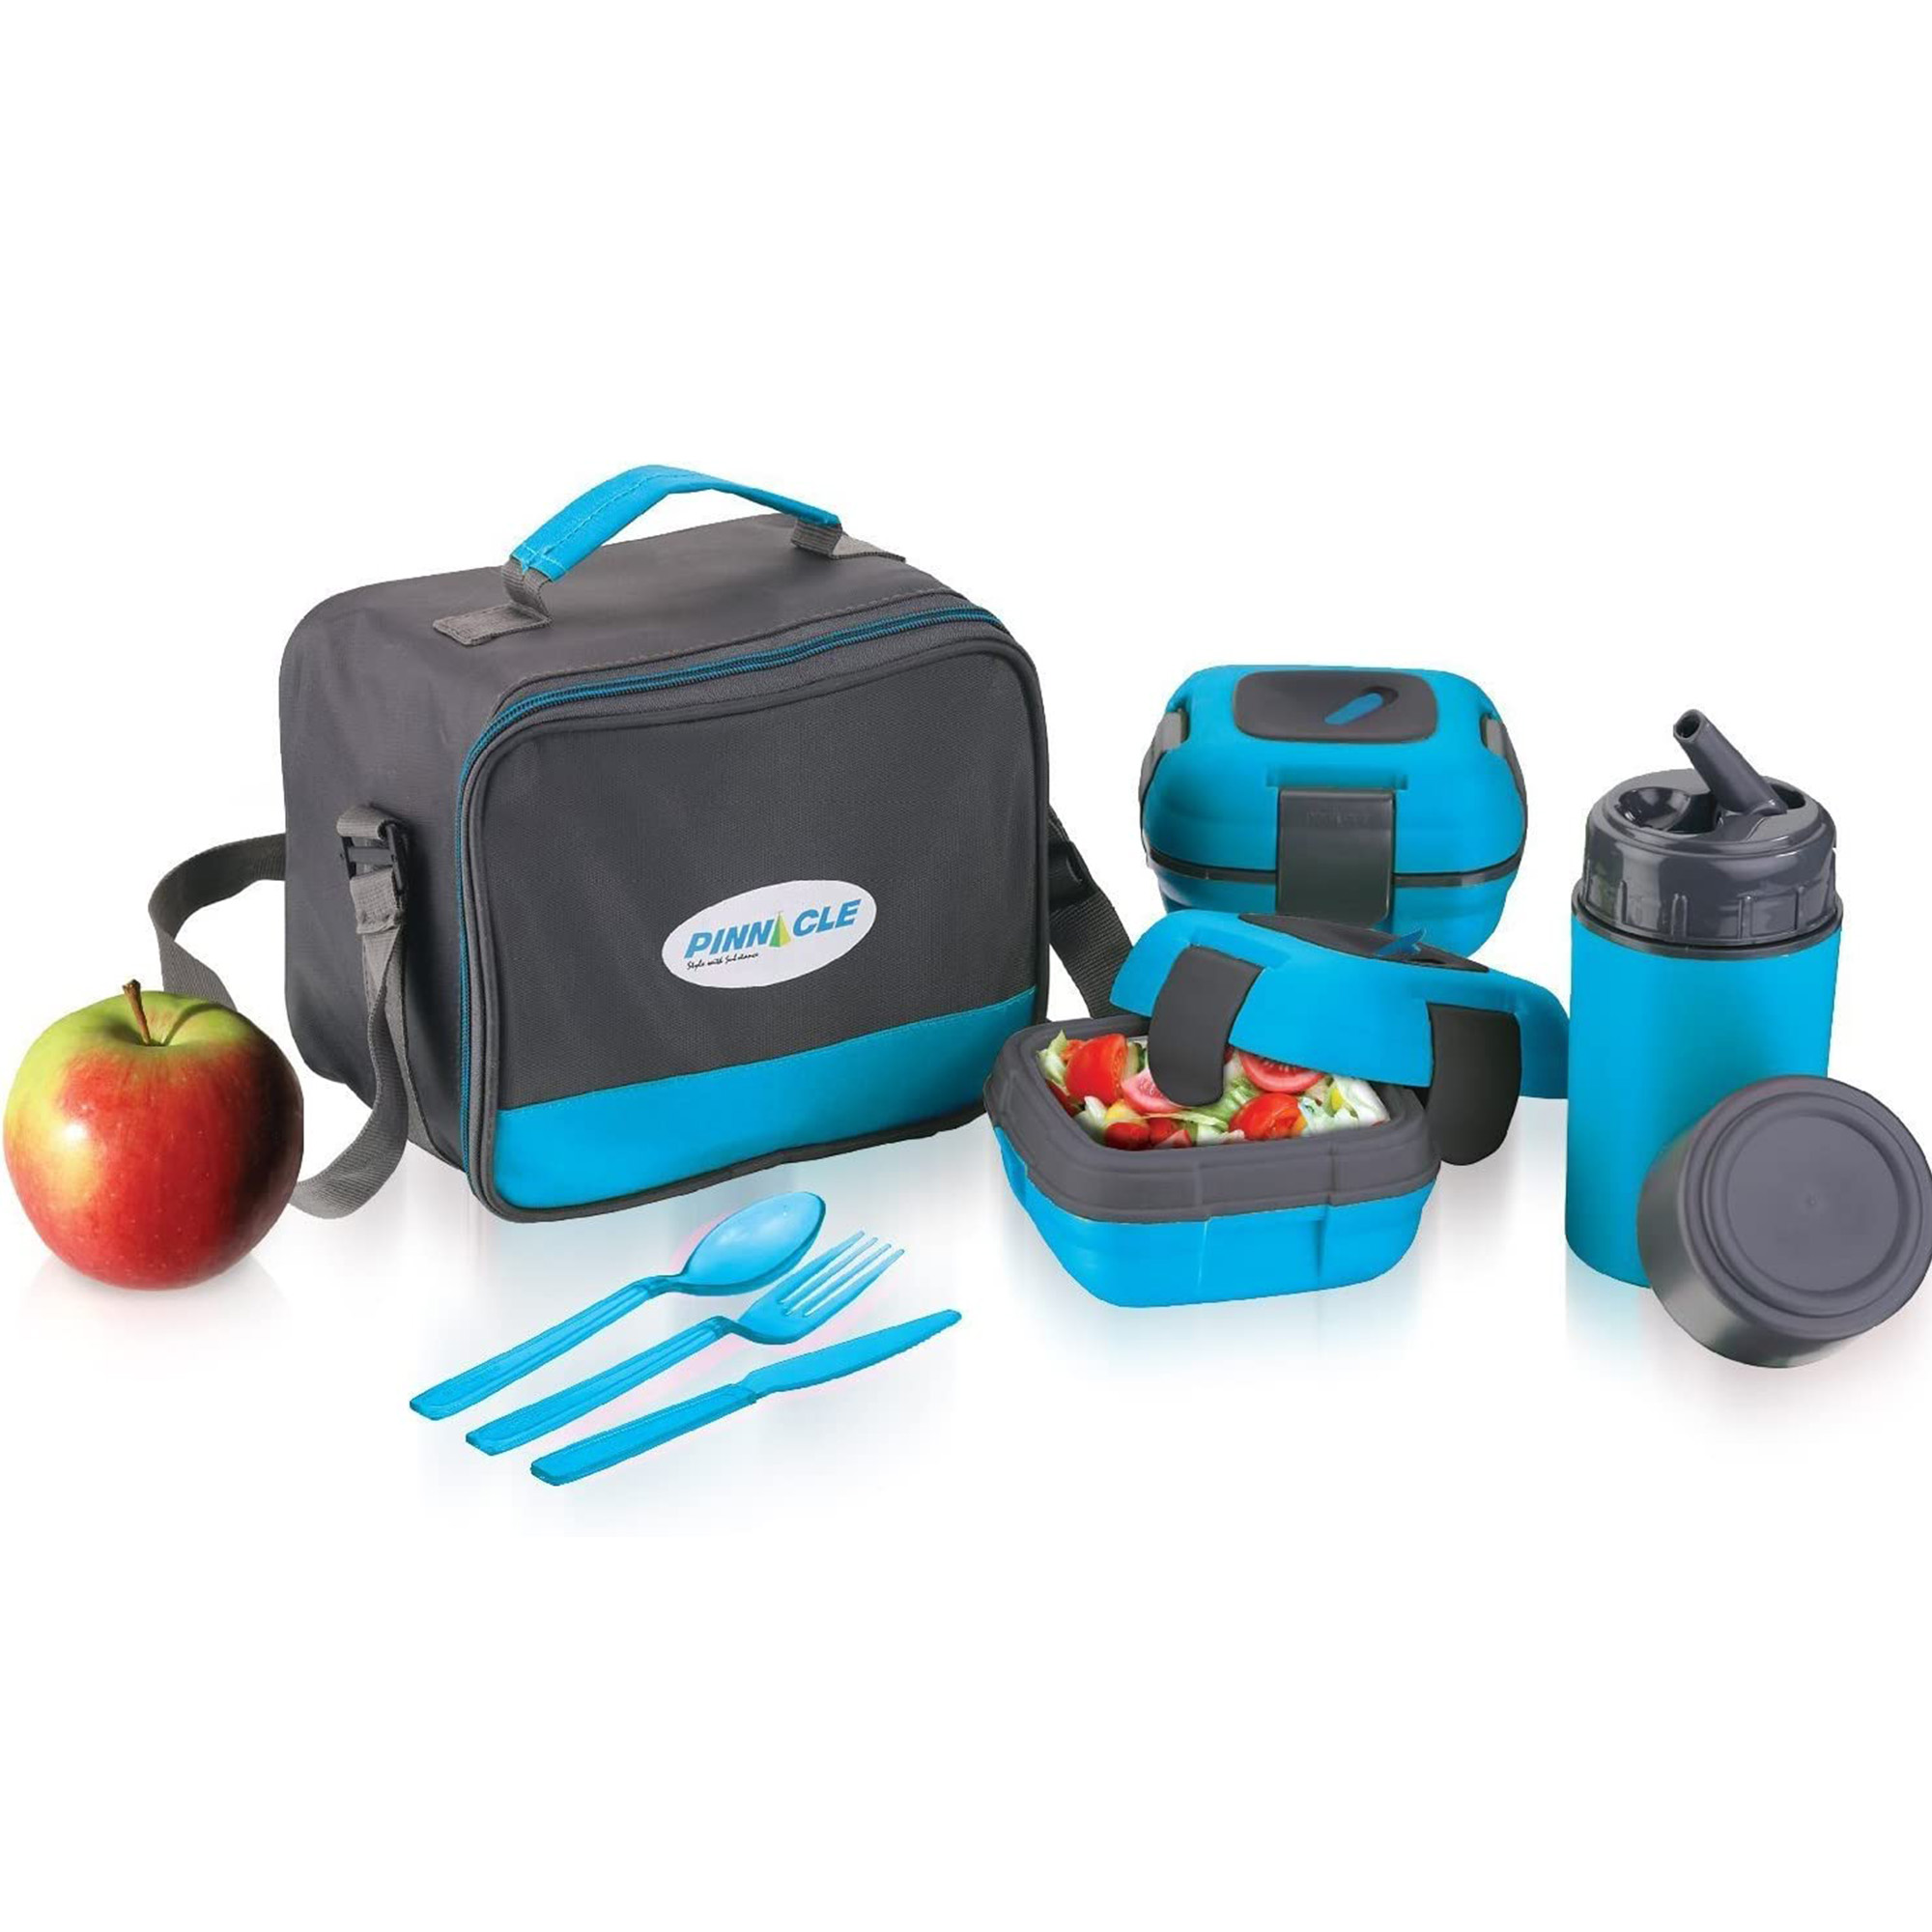 Pinnacle Thermoware Thermal Lunch Box Set Lunch Containers for Adults & Kids, Blue - image 1 of 9